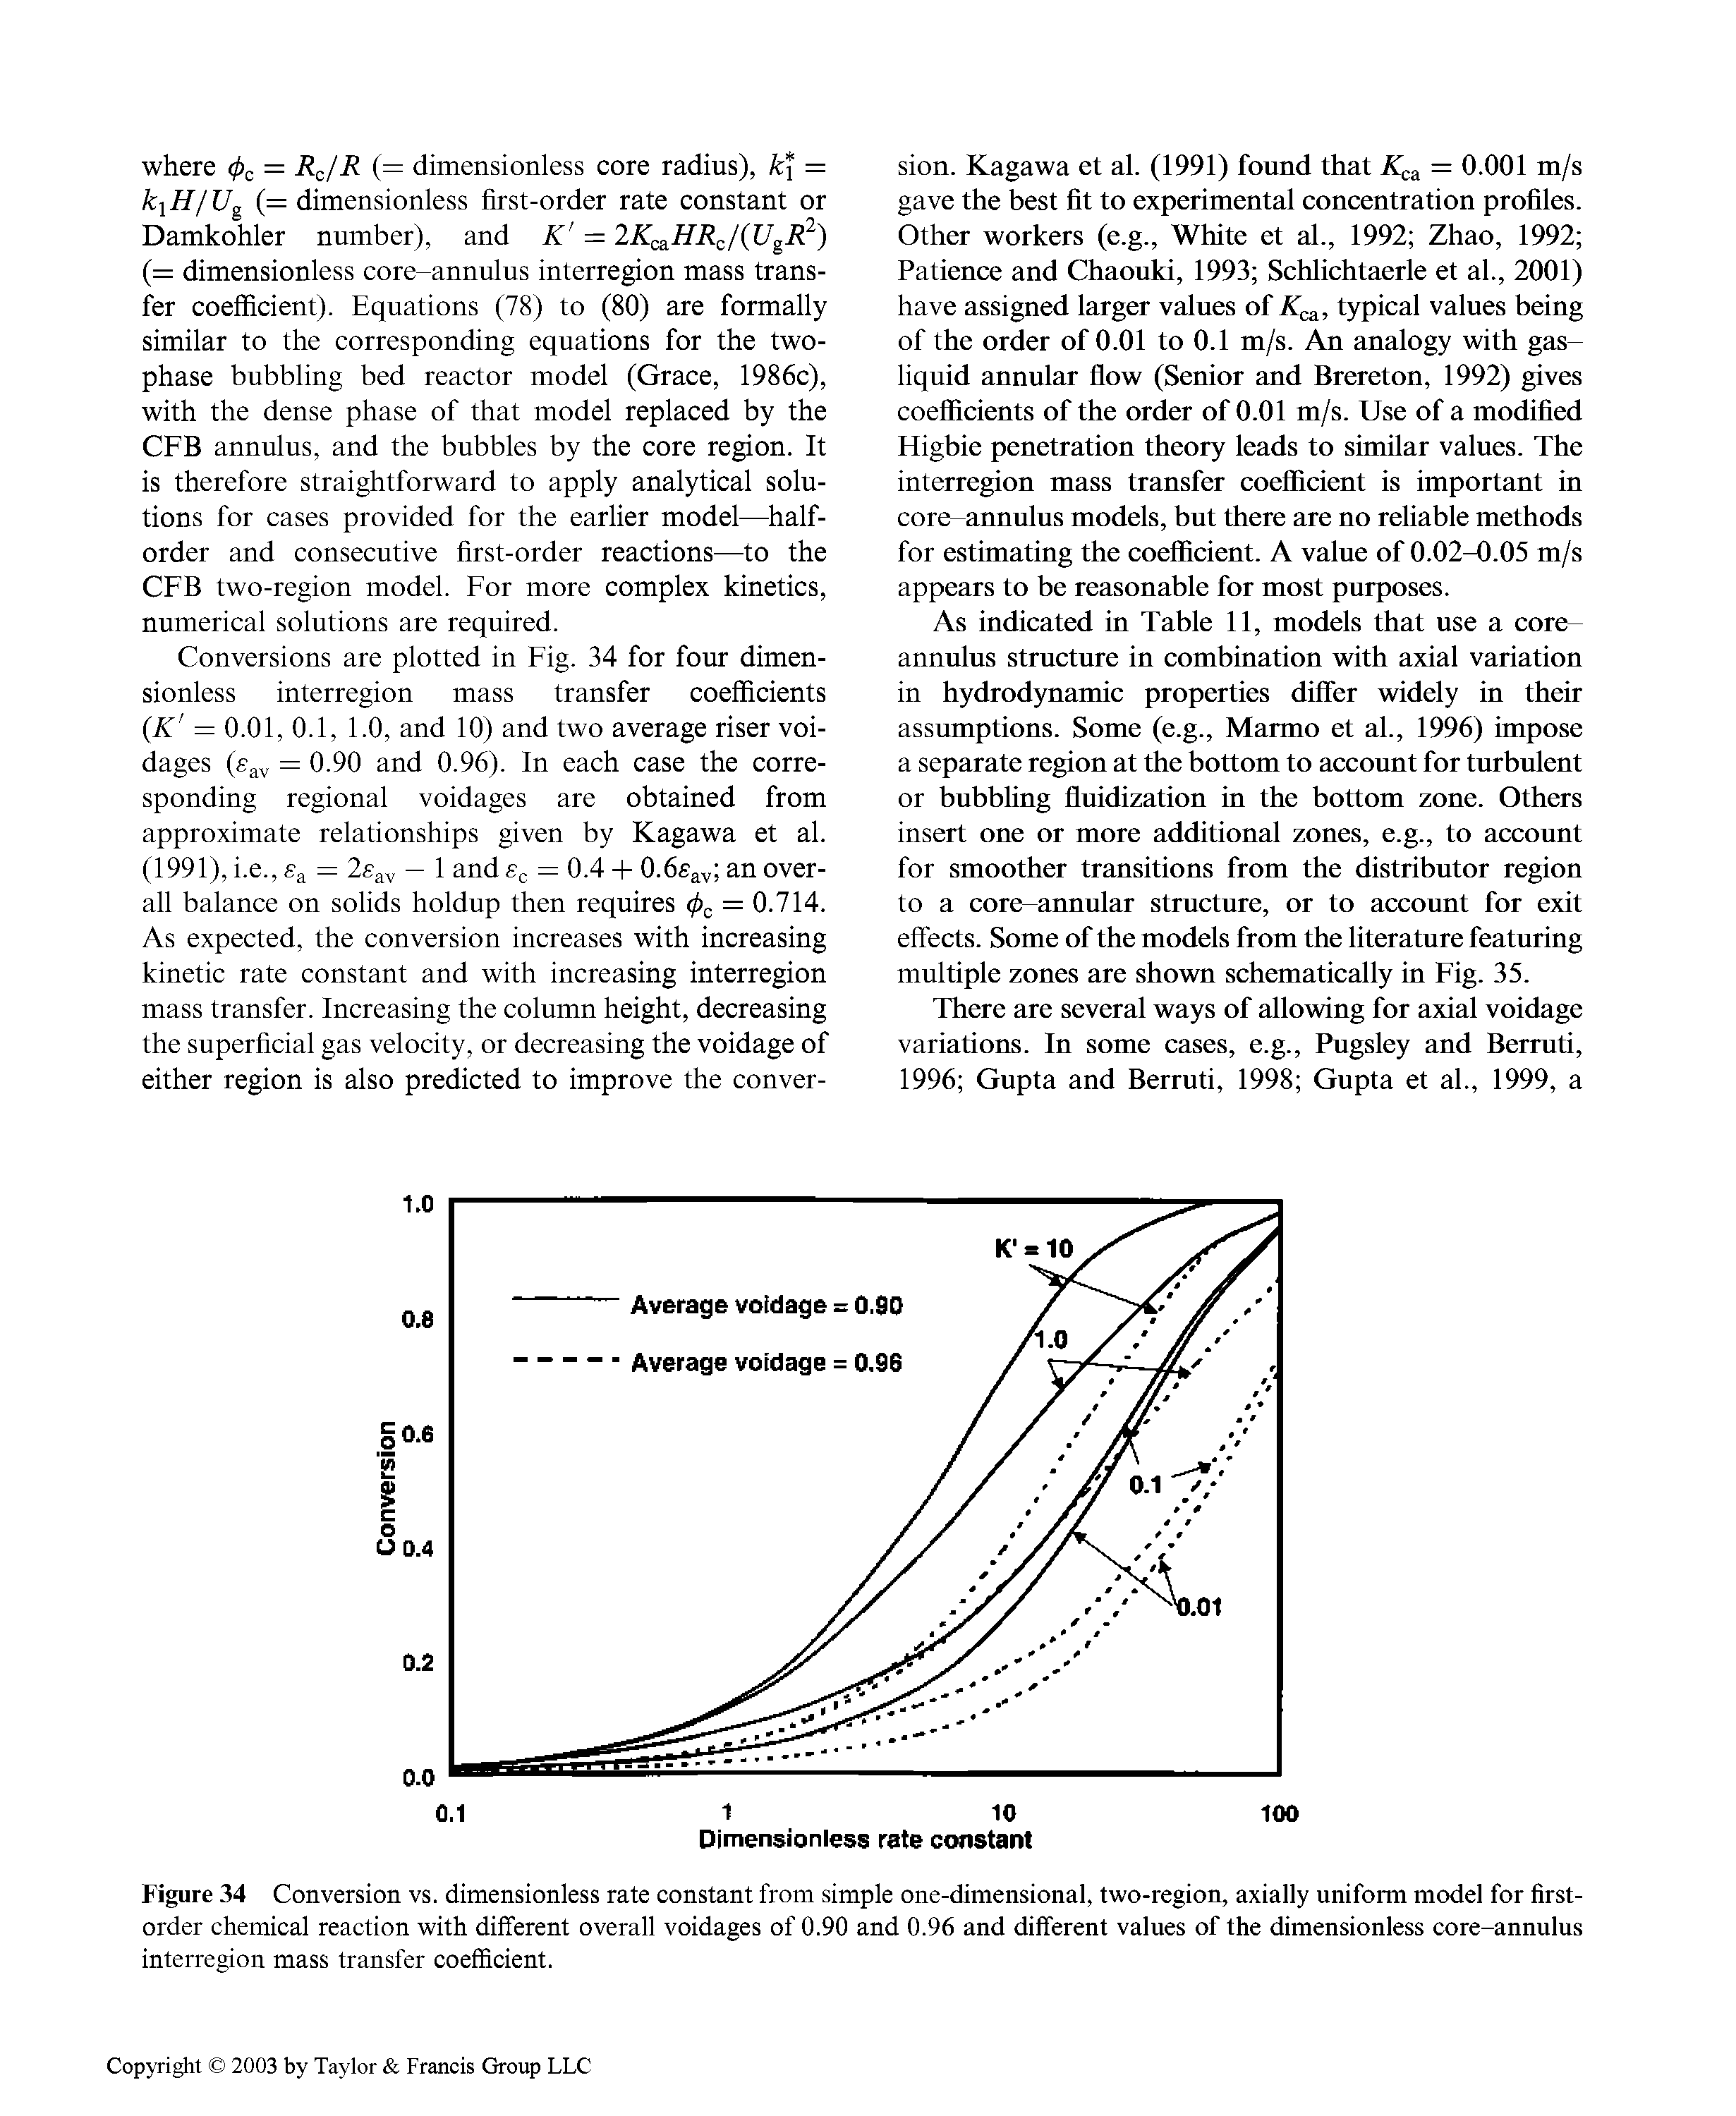 Figure 34 Conversion vs. dimensionless rate constant from simple one-dimensional, two-region, axially uniform model for first-order chemical reaction with different overall voidages of 0.90 and 0.96 and different values of the dimensionless core-annulus interregion mass transfer coefficient.